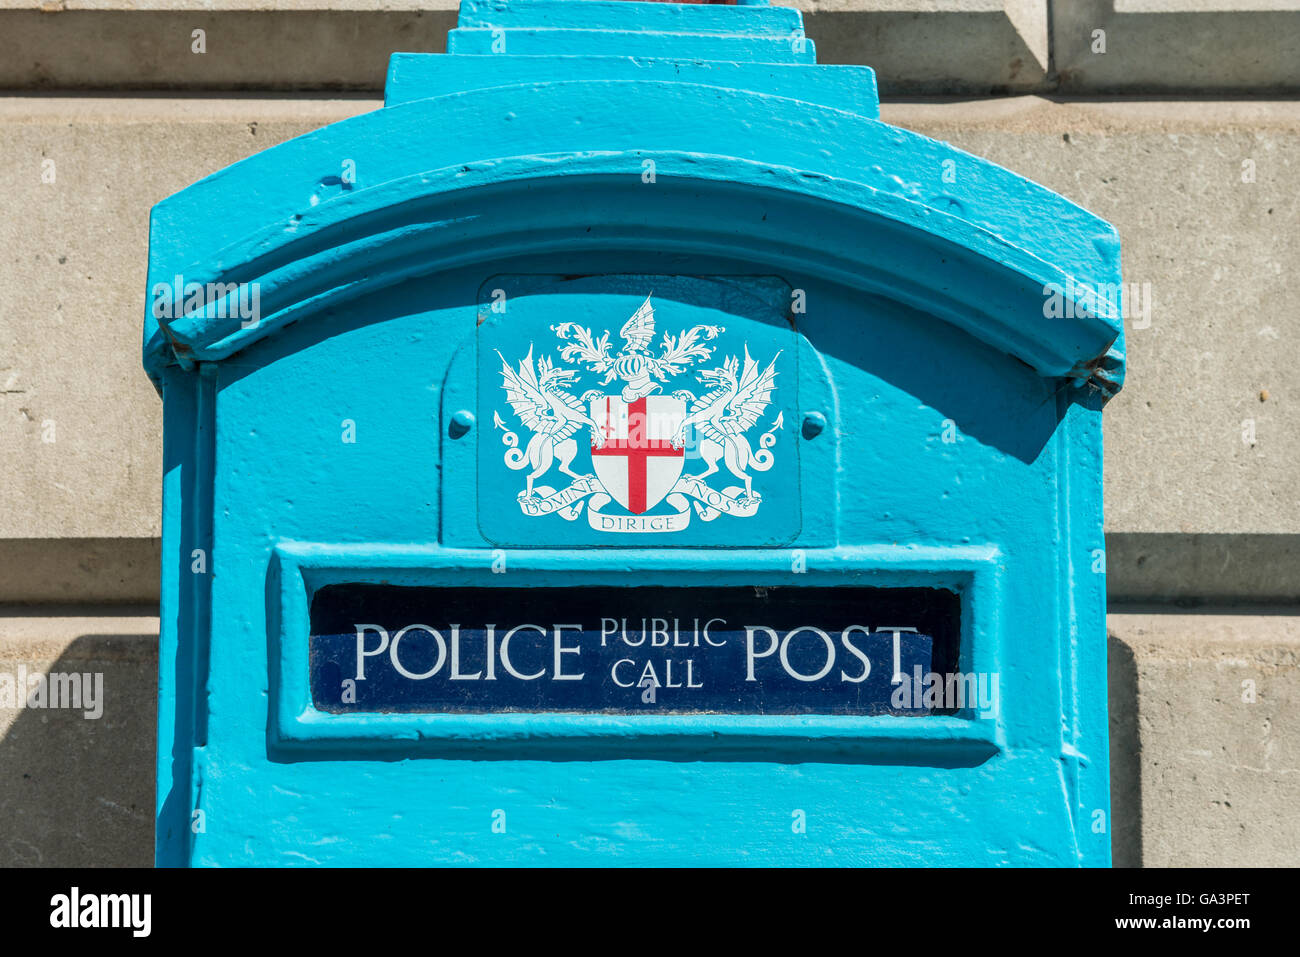 London, United Kingdom - June 25, 2016: London police public call box. Original police blue telephone box which was free for use Stock Photo